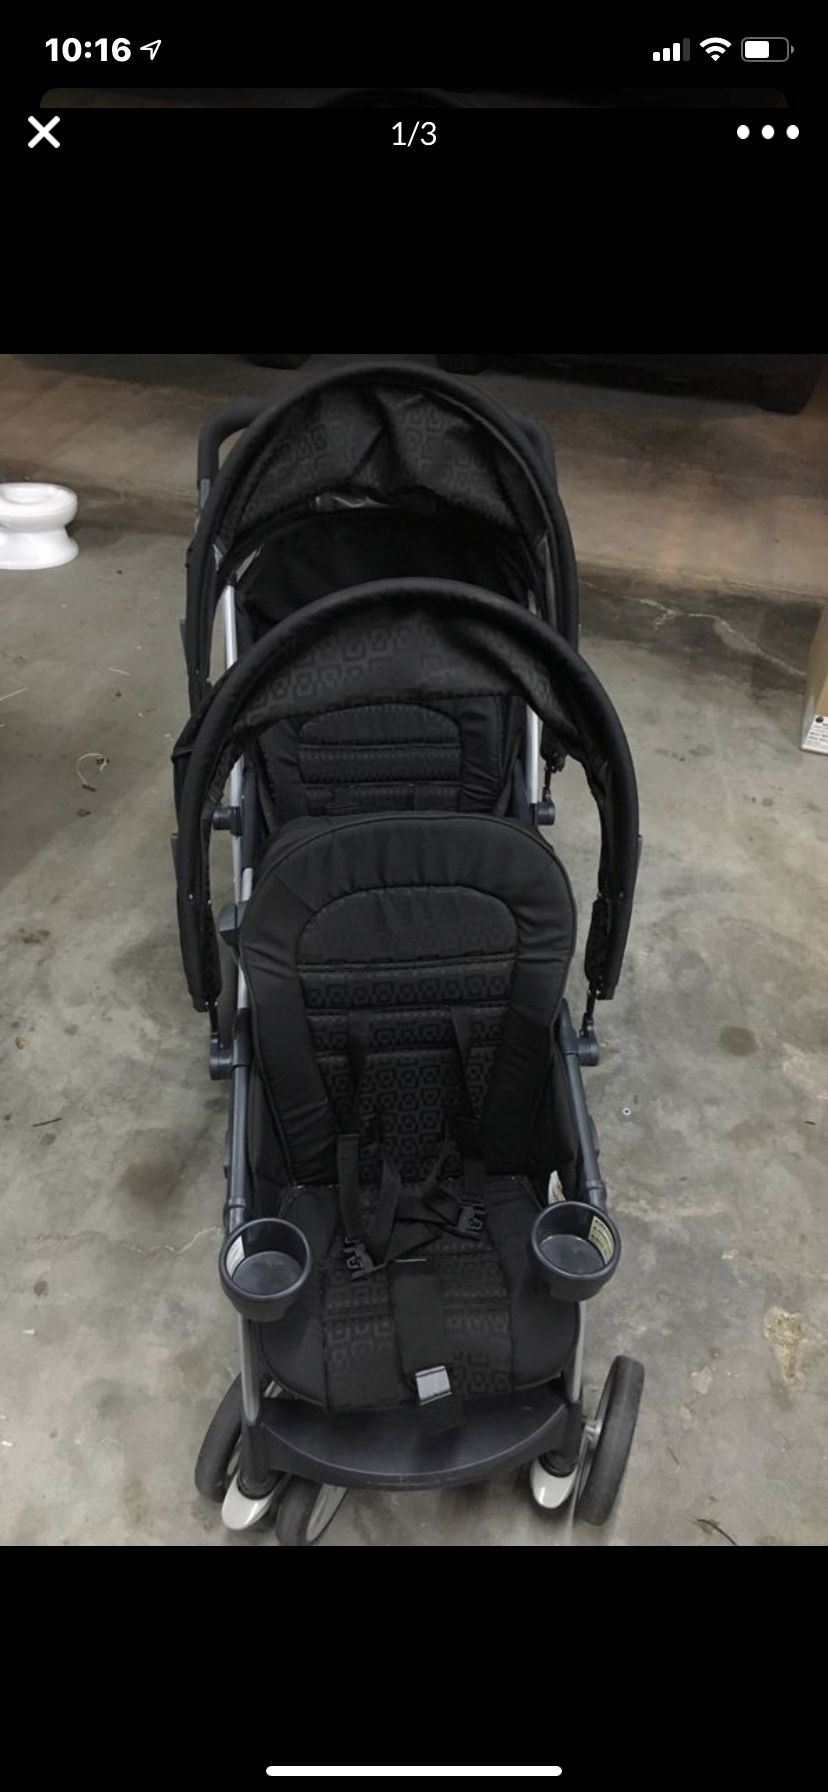 Chicco Keyfit Double Stroller